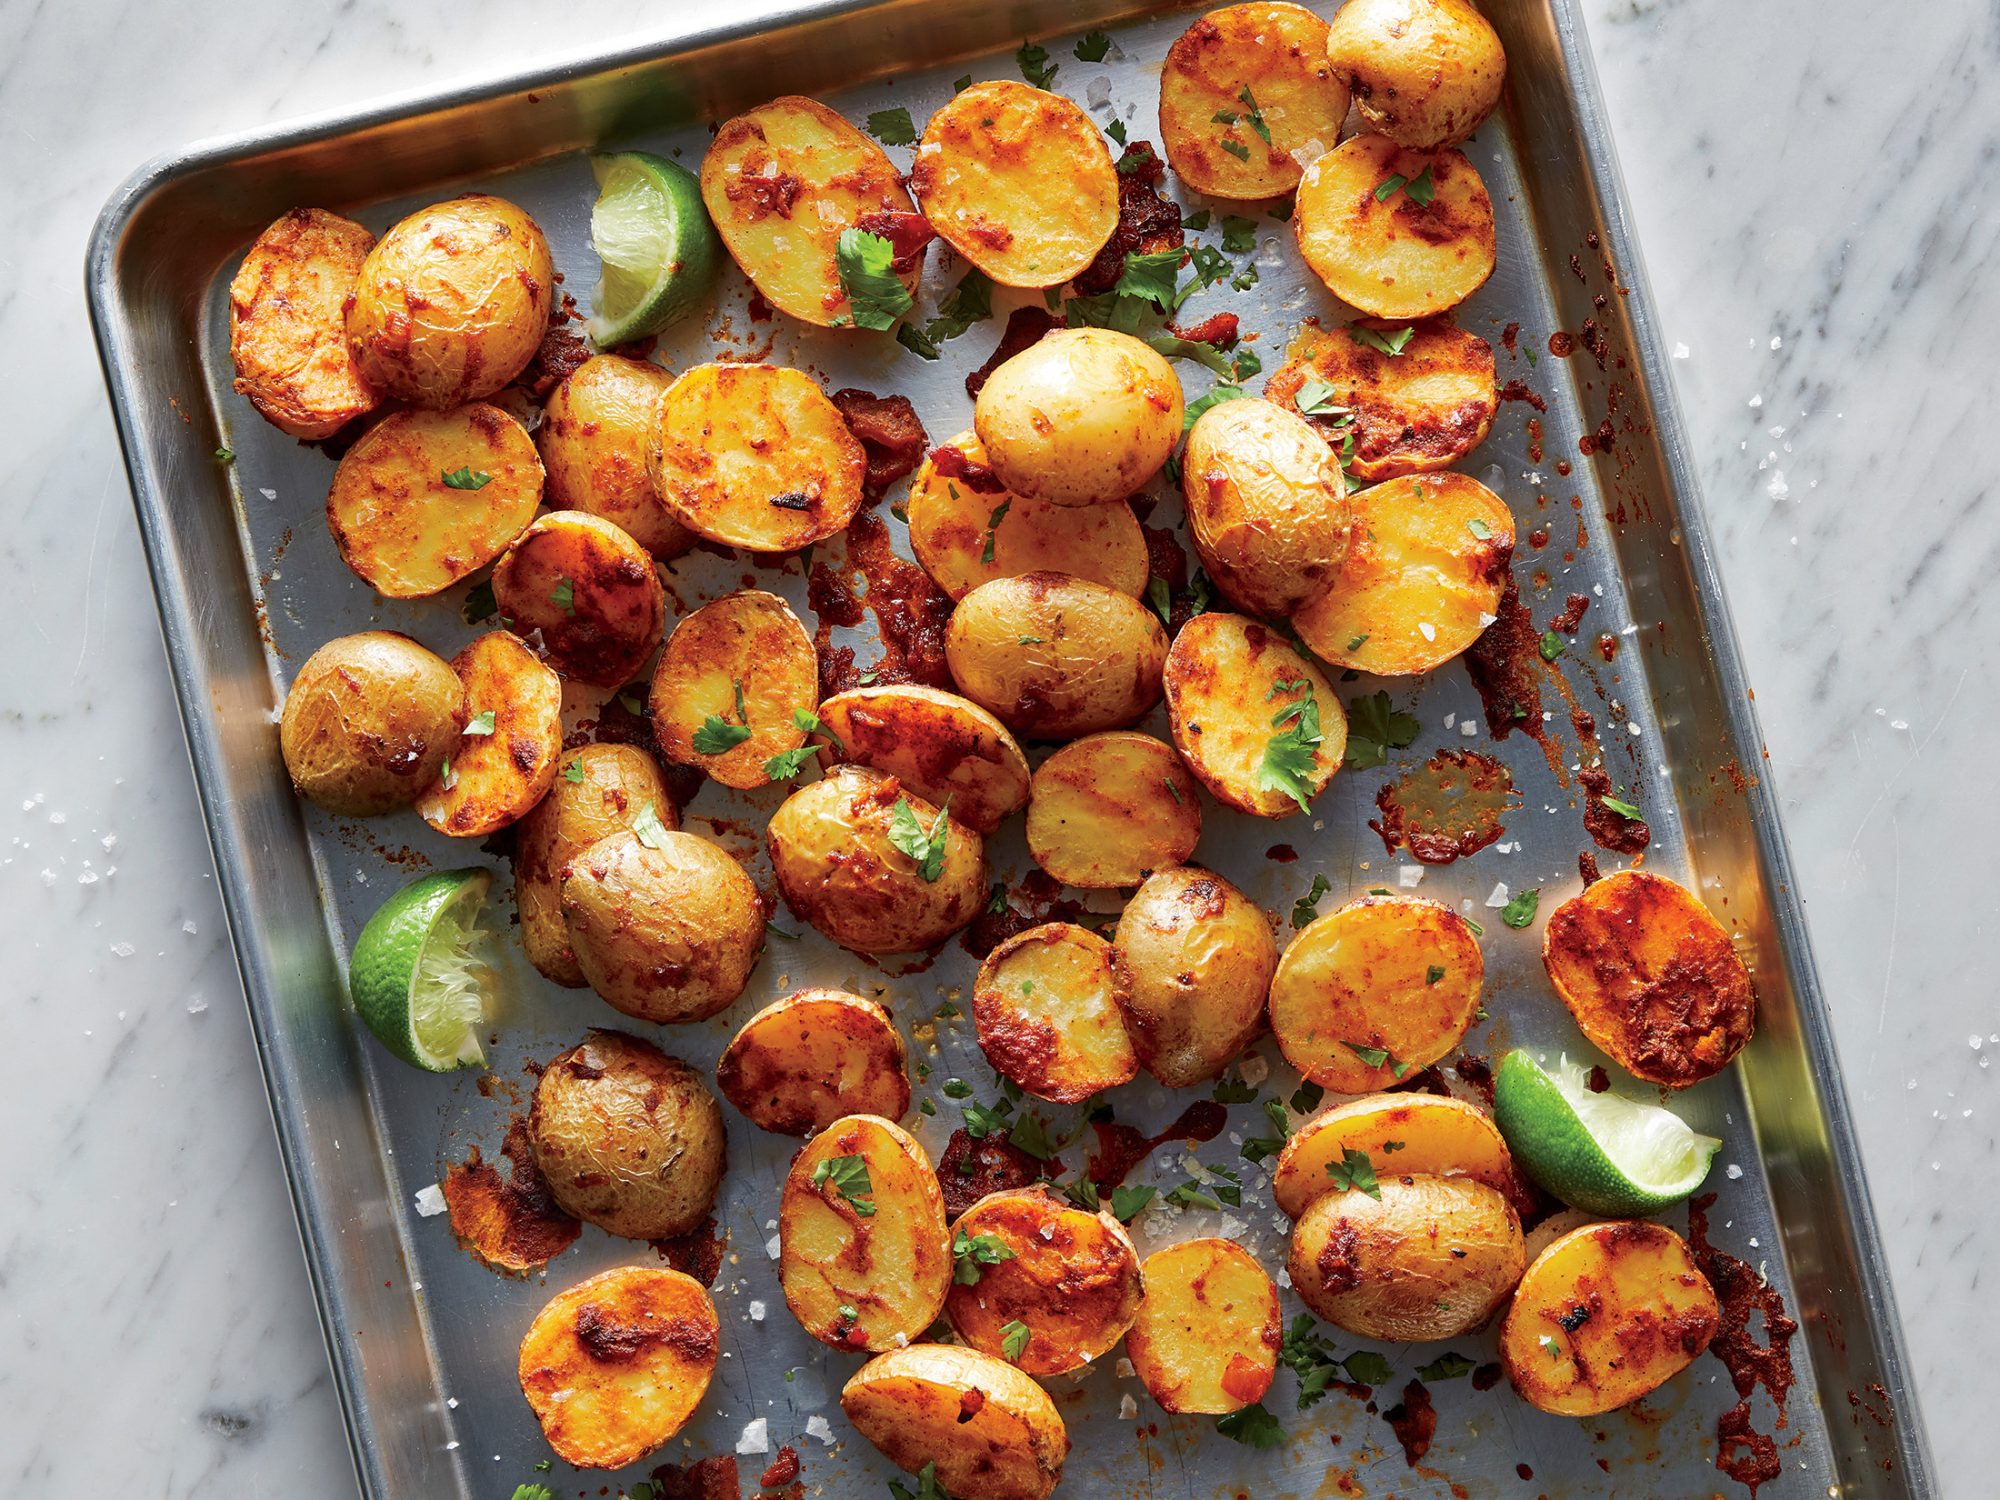 https://static.onecms.io/wp-content/uploads/sites/19/2018/11/01/salsa-roasted-potatoes-1807-p42-2000.jpg